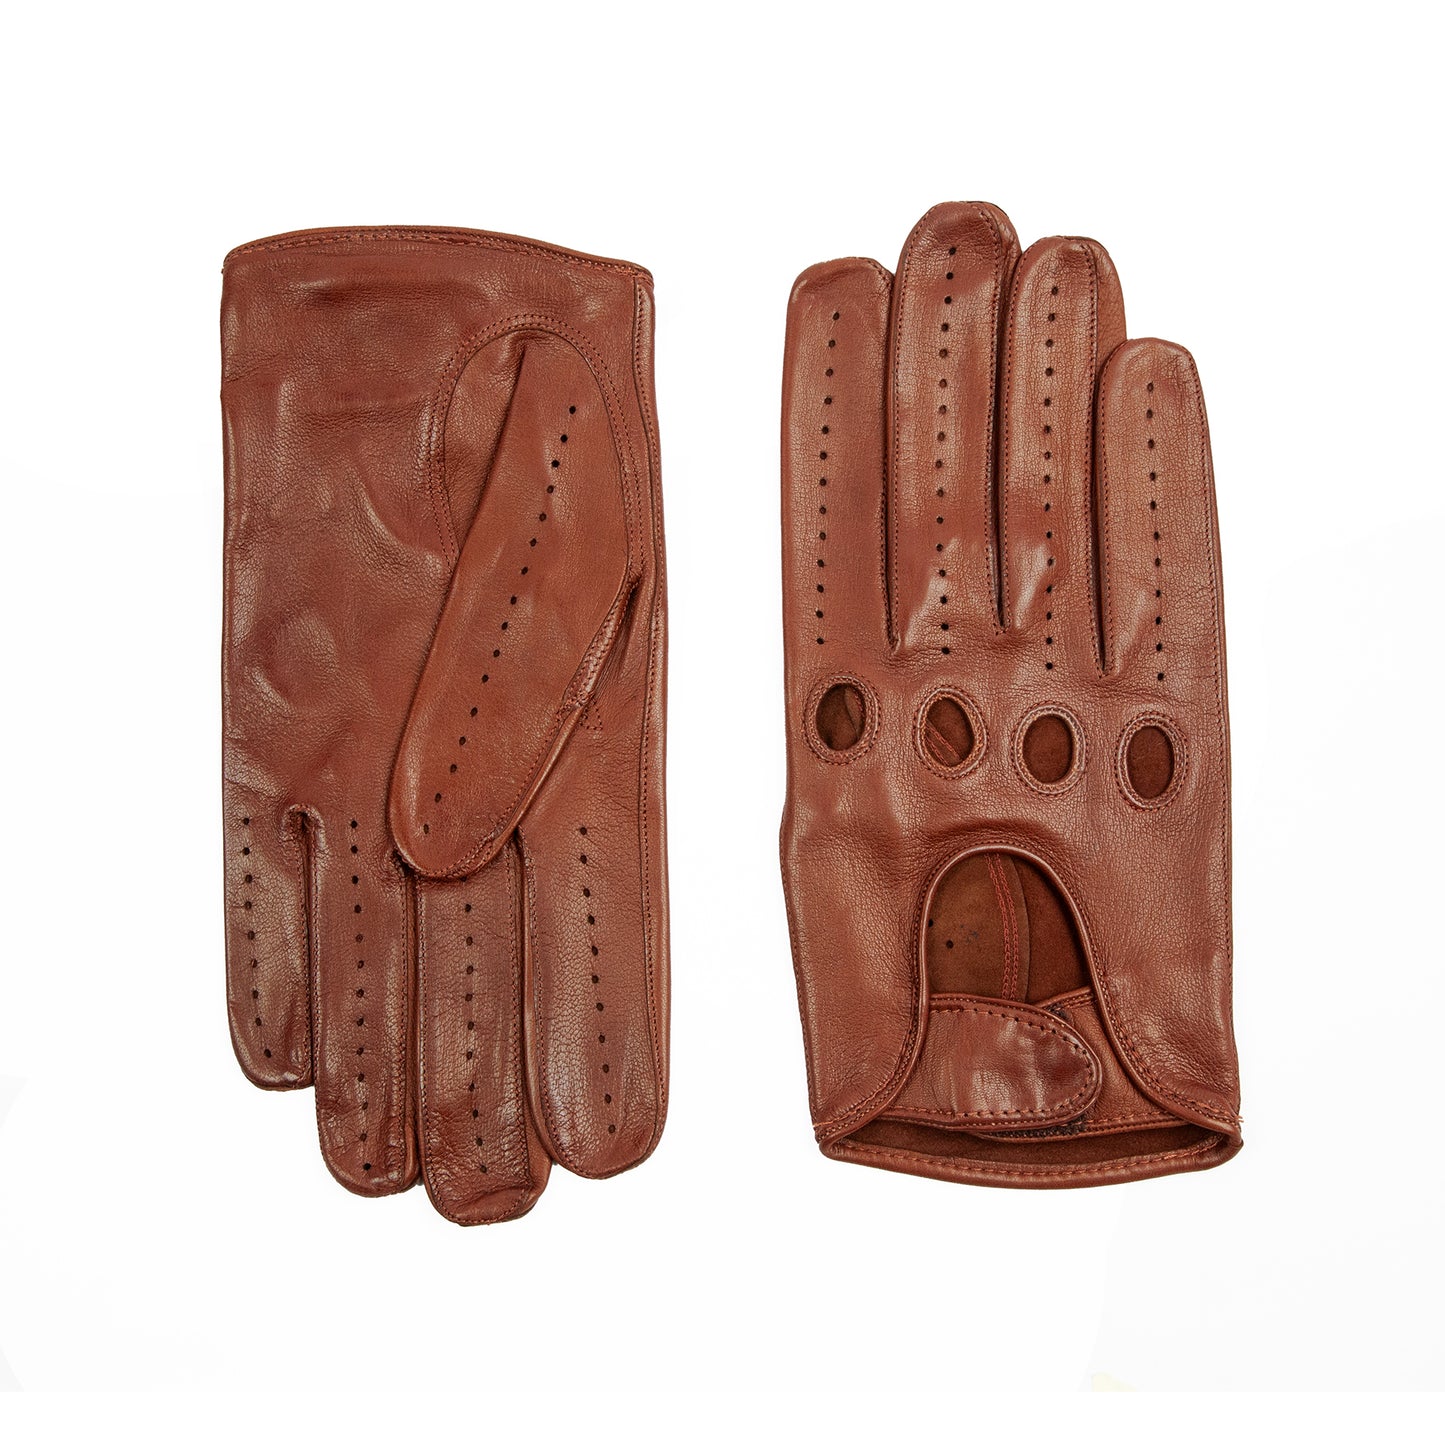 Men's cognac leather driving gloves with strap closure